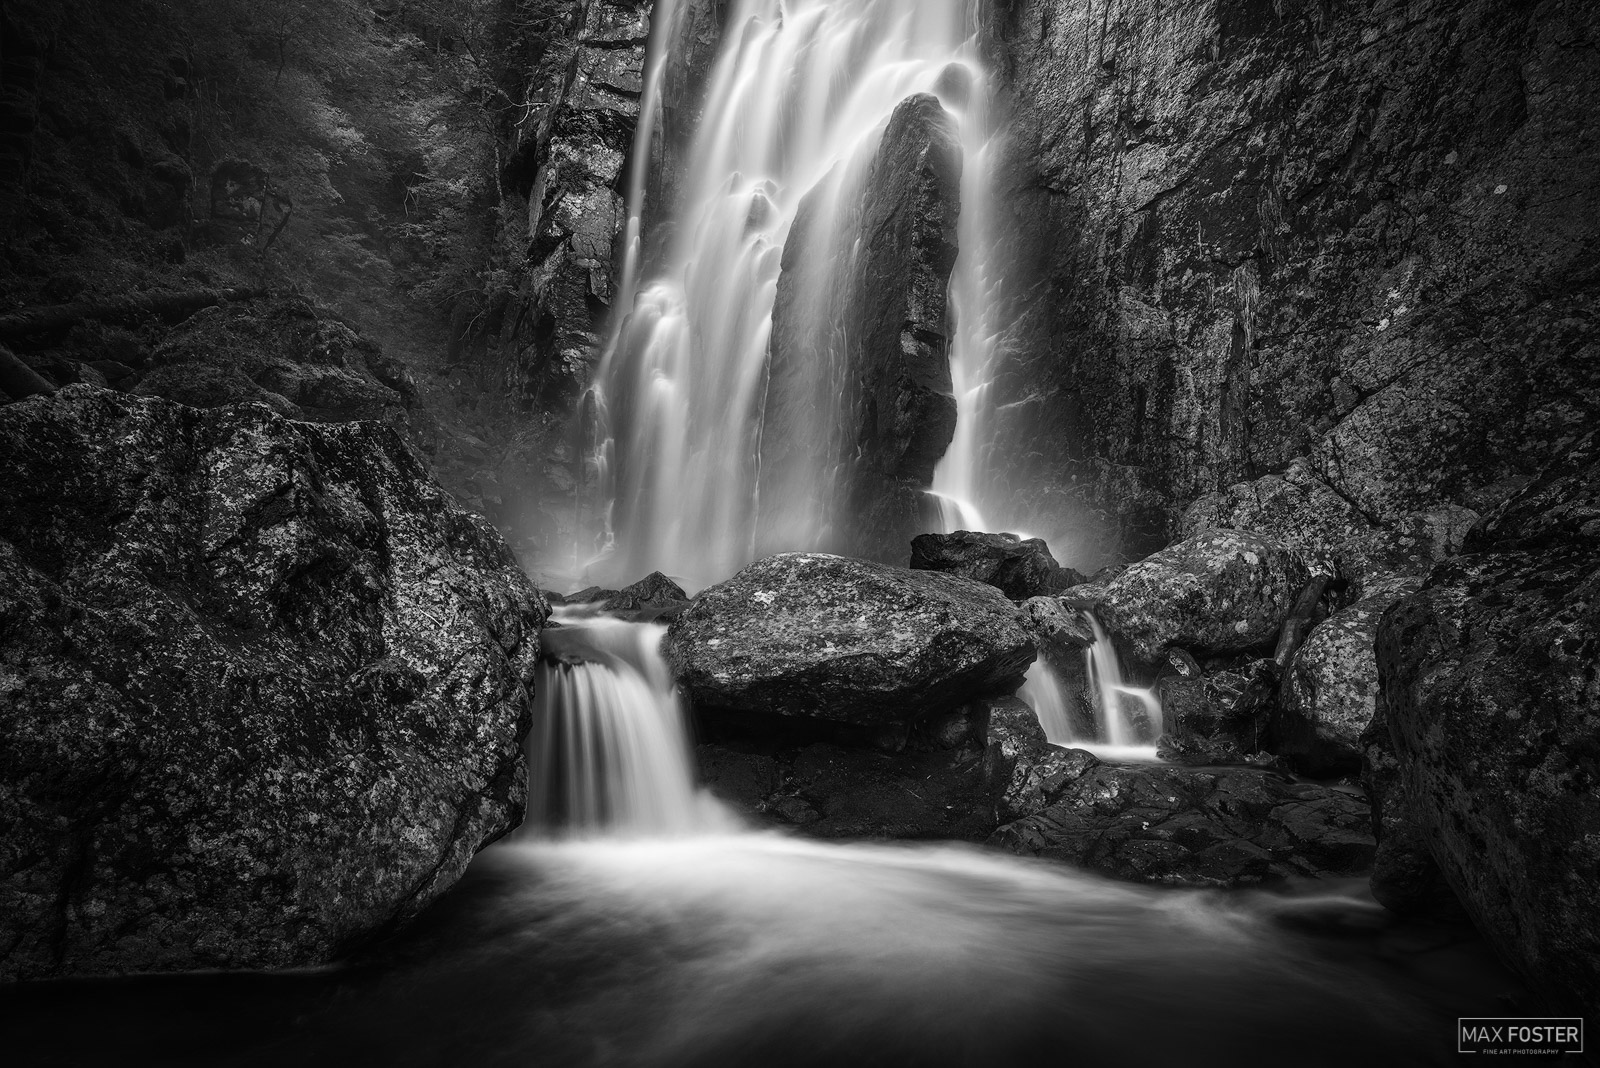 Elevate your space with Fountain Of Life, Max Foster's limited edition black & white photography print of Rainbow Falls in the...